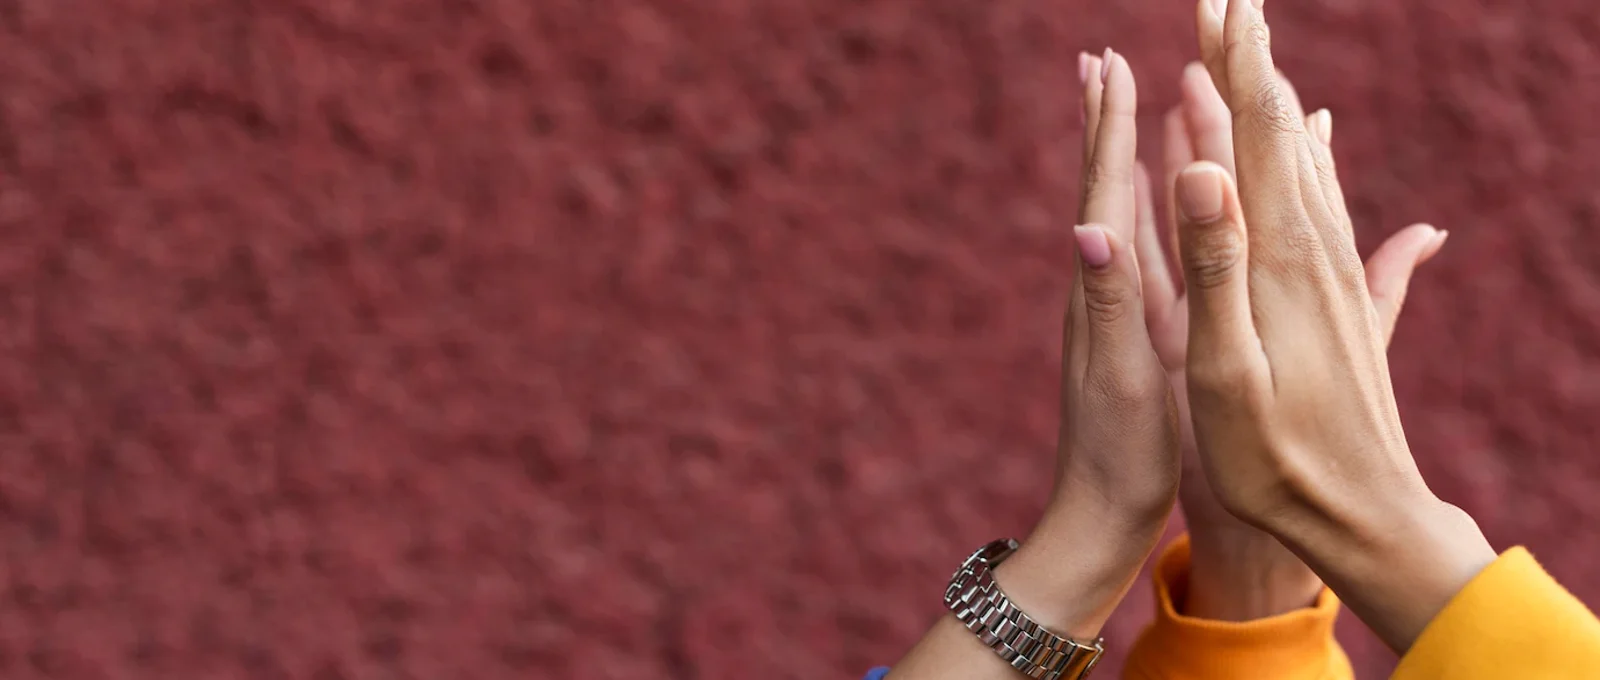 Close-up photo of three women's hands coming together in a high-five with a textured reddish wall in the background